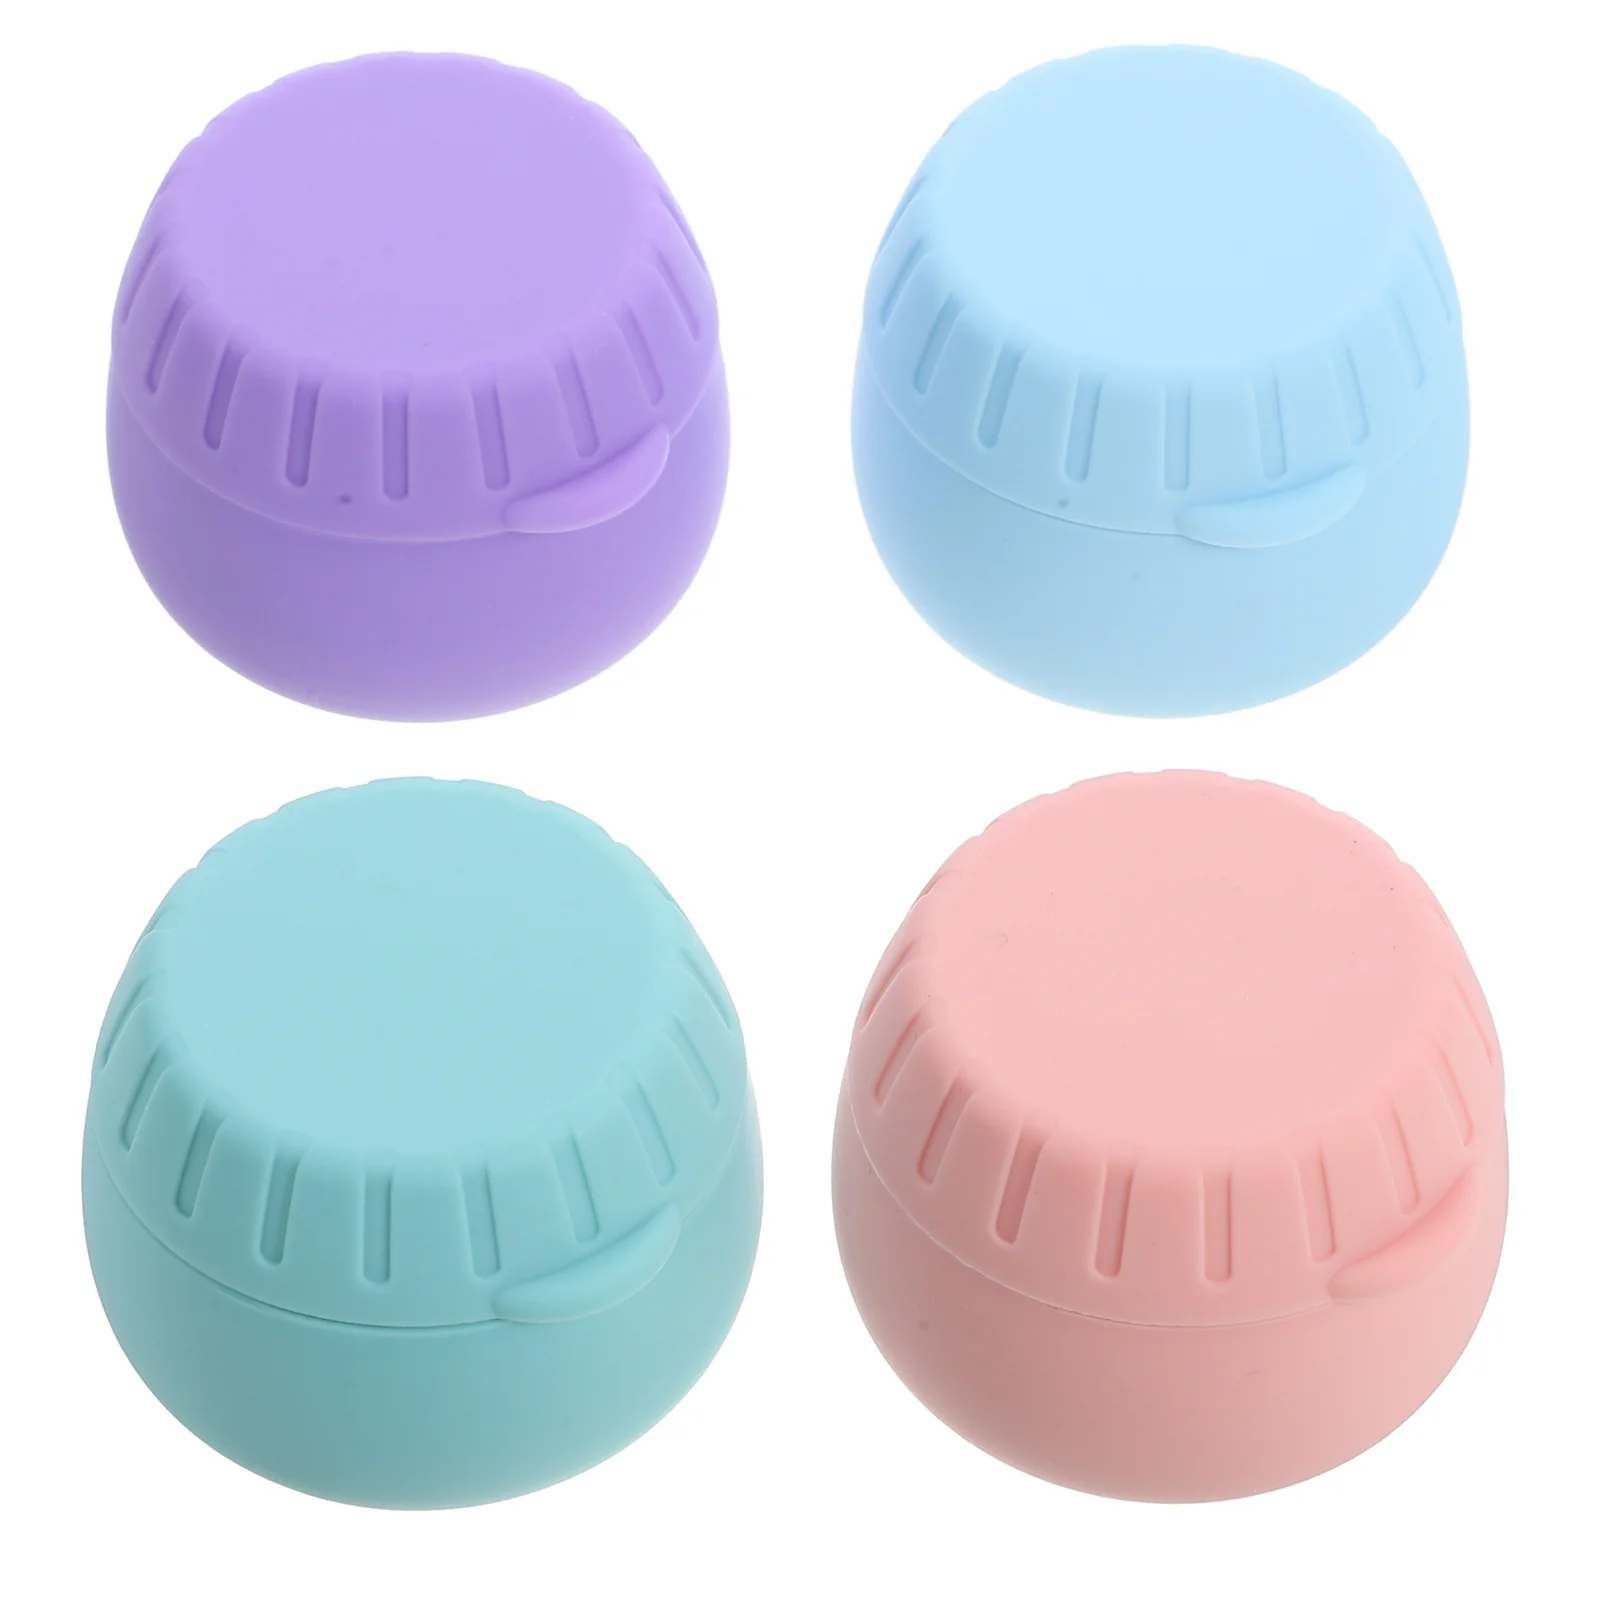 

4 Pcs Packing Box Makeup Container Sample Jars Lip Balm Containers Small with Lids Mini Silica Gel Travel Creami